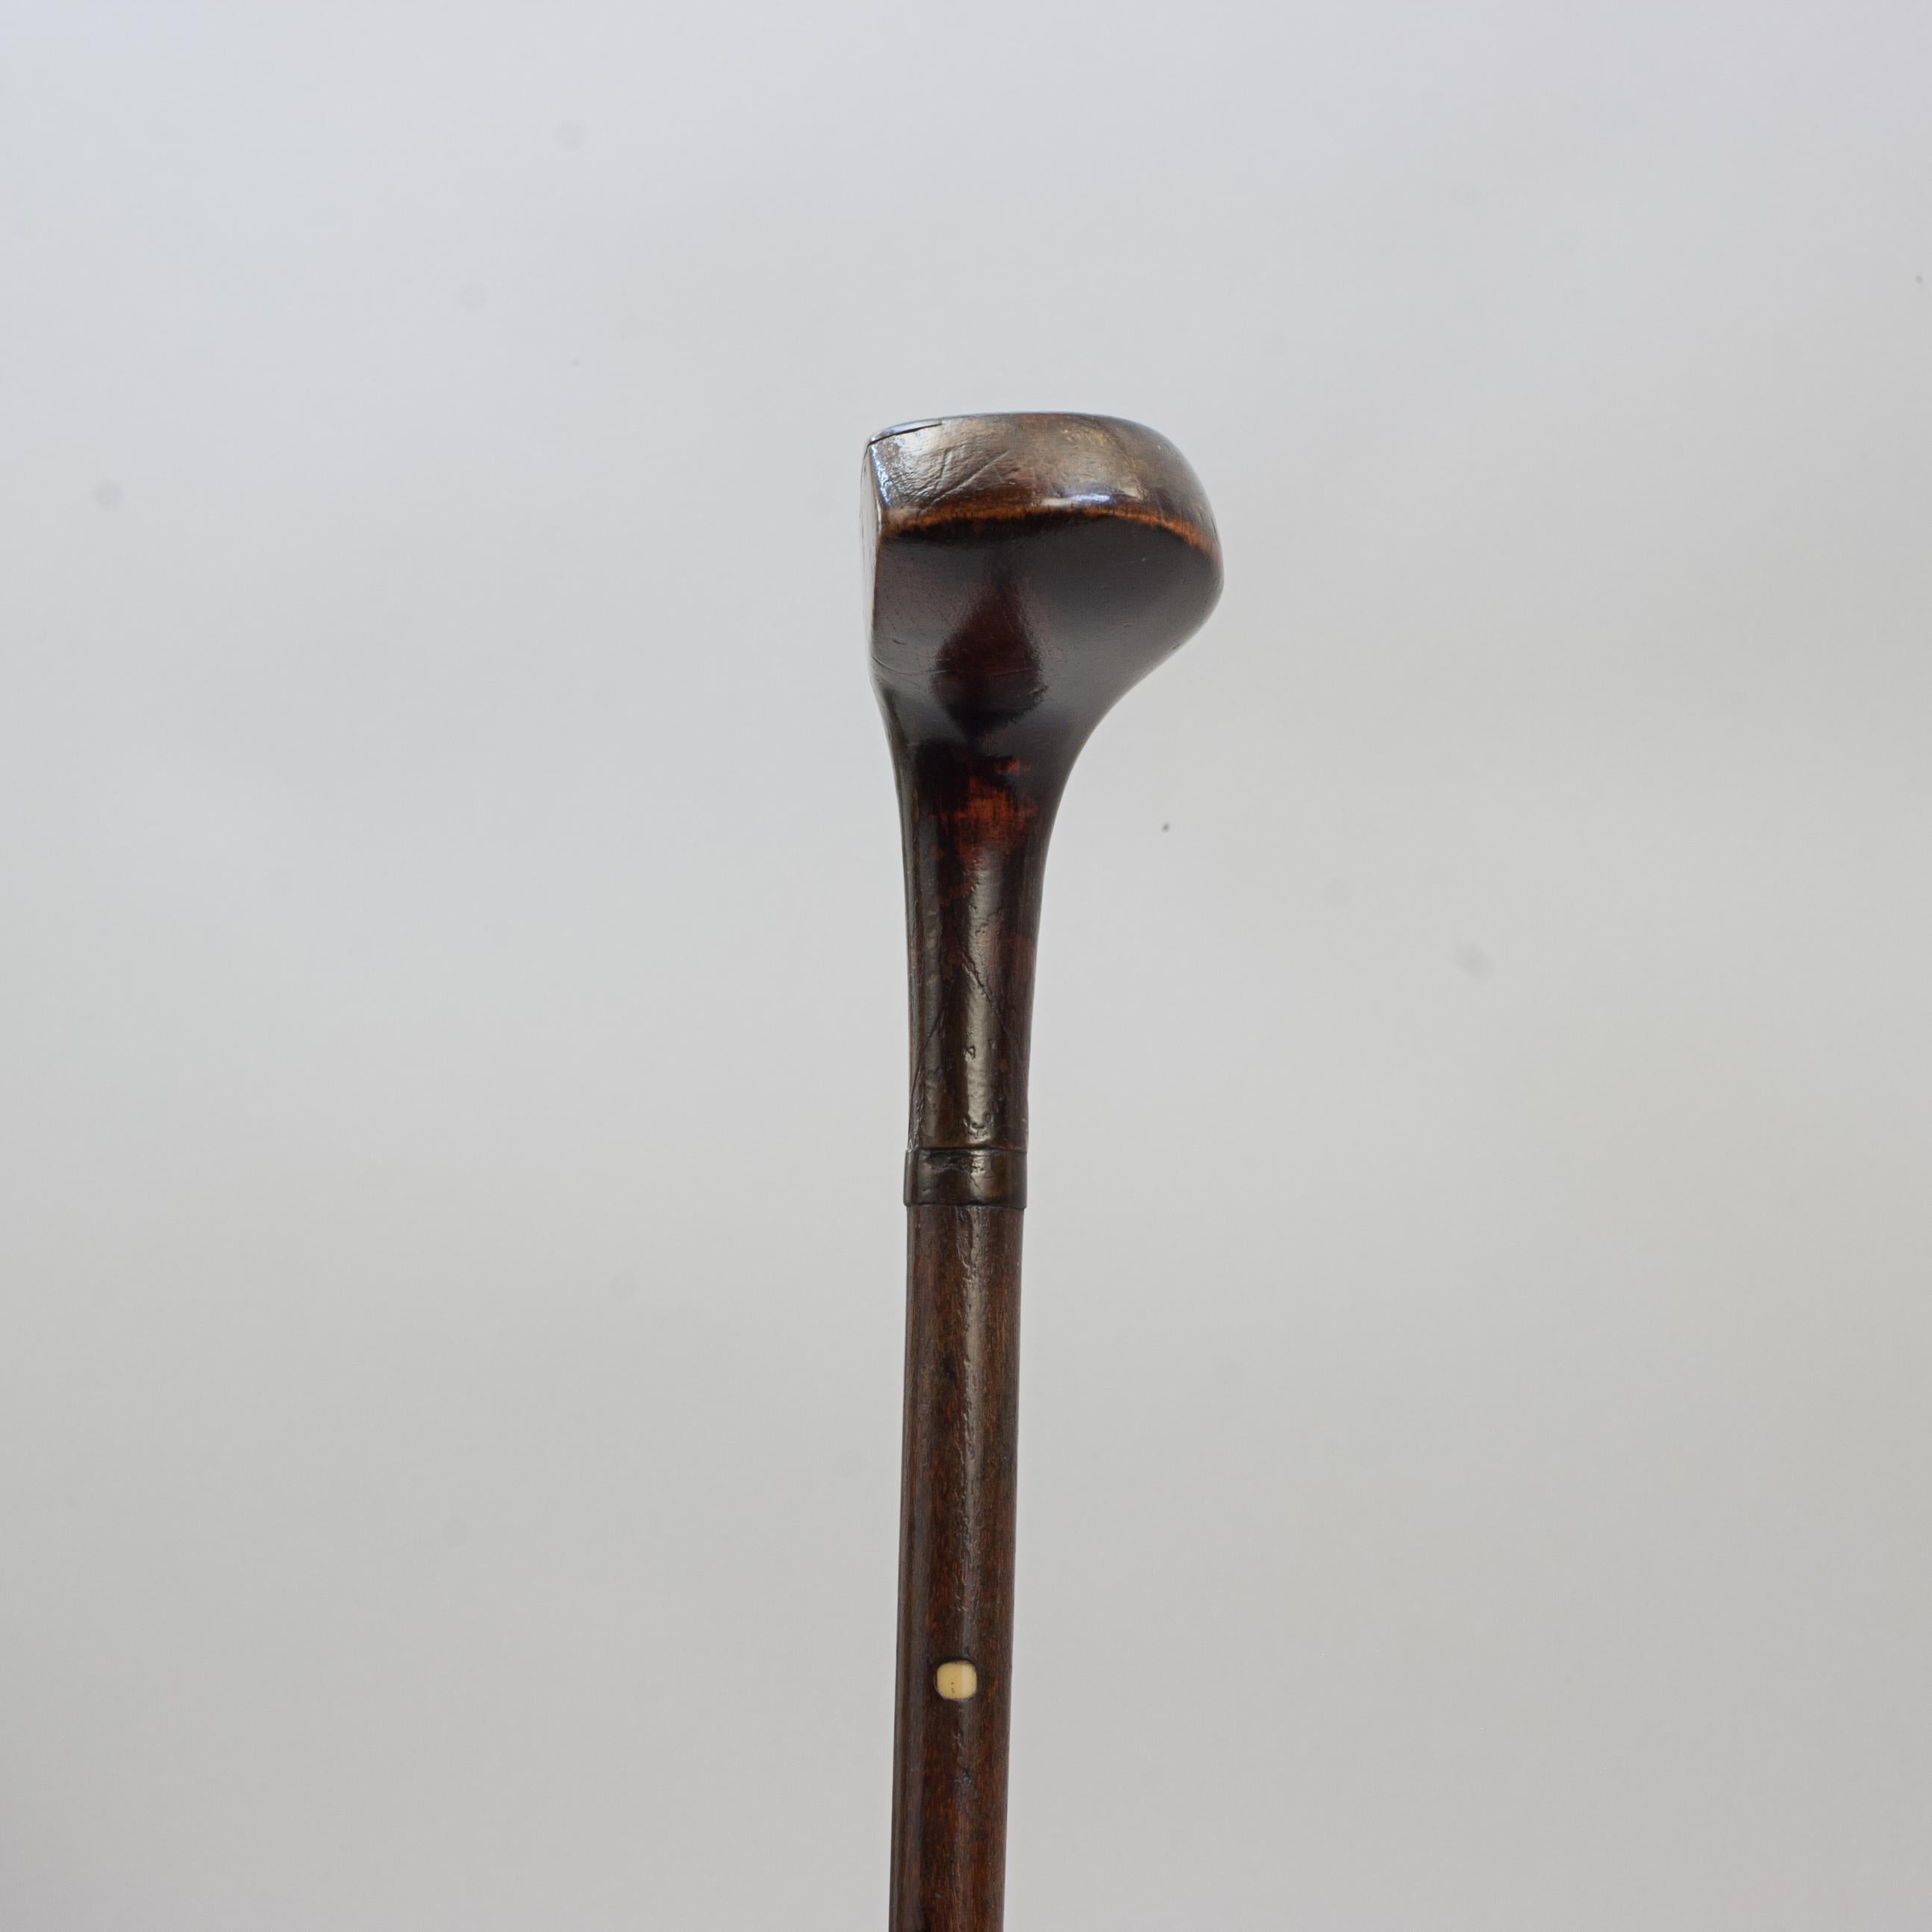 Antique Sunday Club, Golf Club Walking Stick.
A desirable walking cane with the handle in the shape of a golf club head. The gentleman's walking stick has a persimmon socket head handle with a small pegged horn insert. It is with hickory shaft with